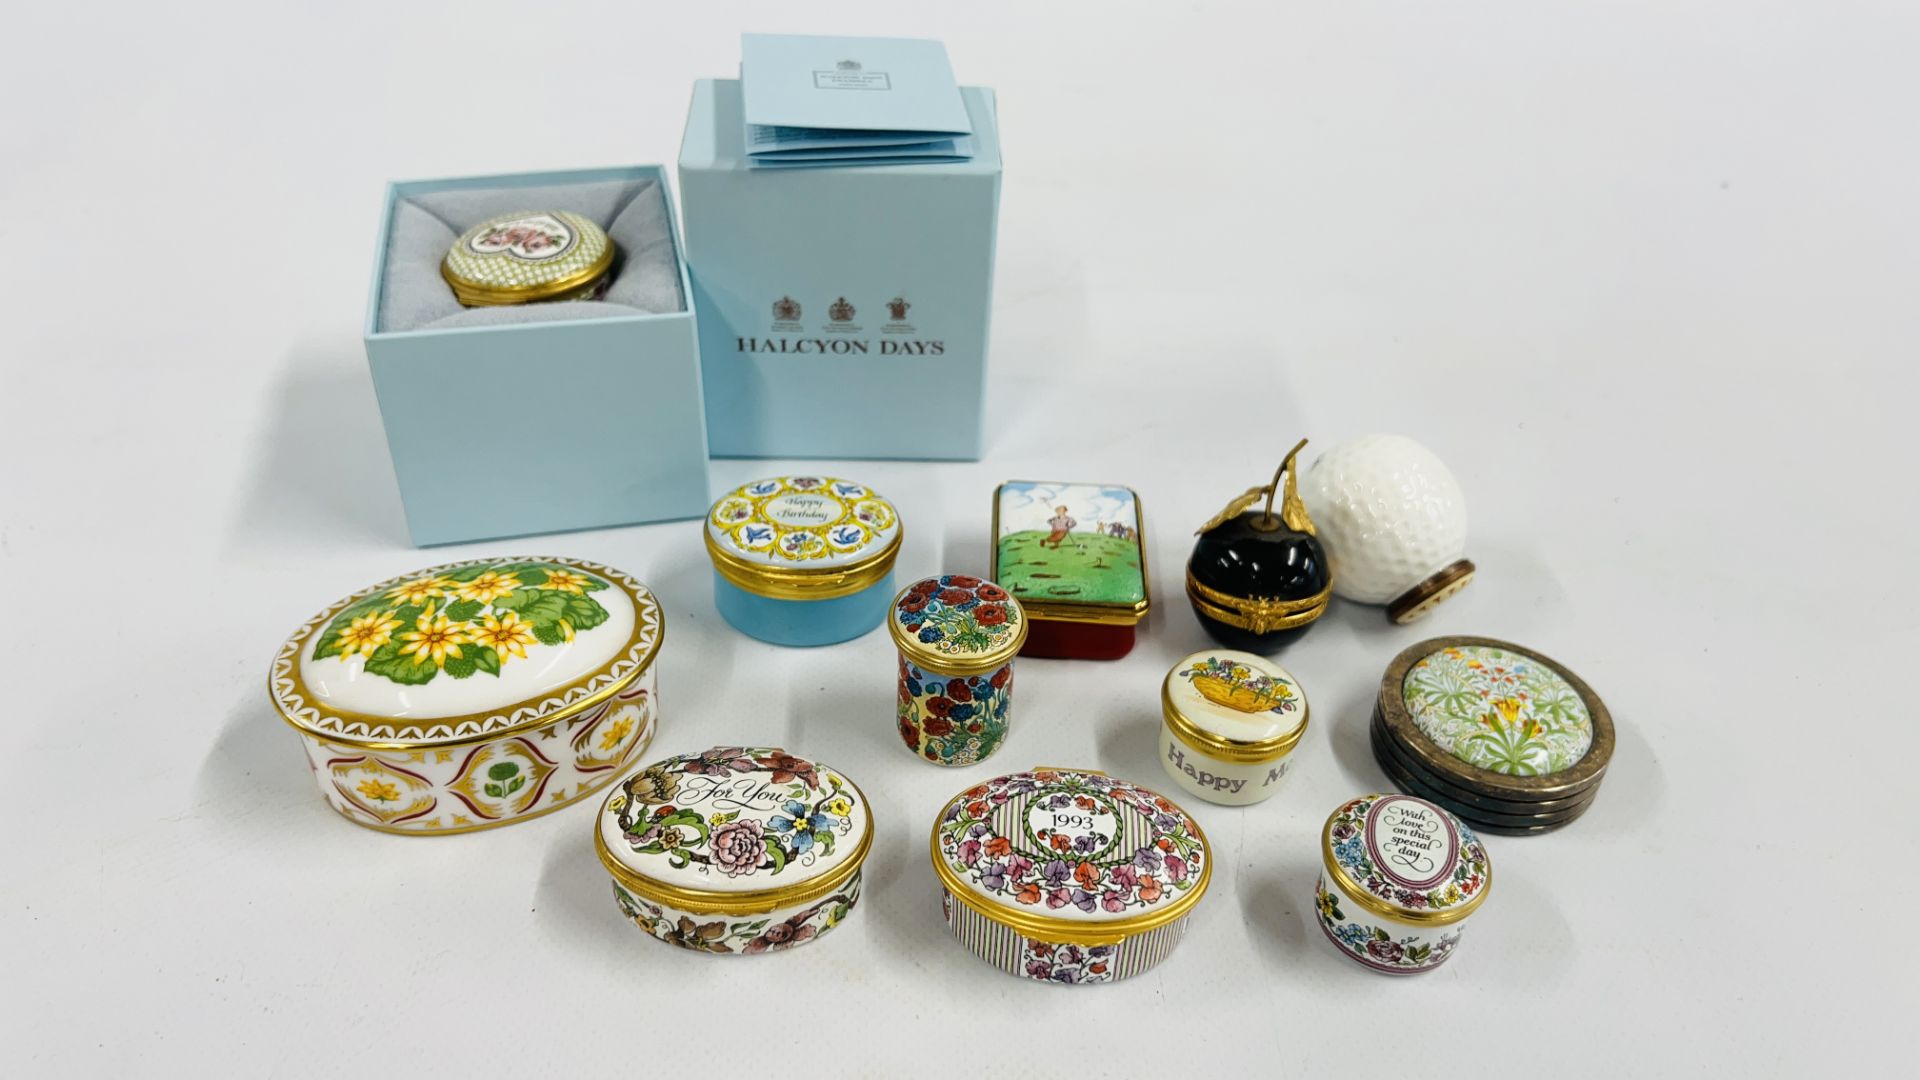 A GROUP OF 10 TRINKETS TO INCLUDE ROYAL CROWN DERBY "CELANDINE" TRINKET, HALCYON DAYS ENAMELS,